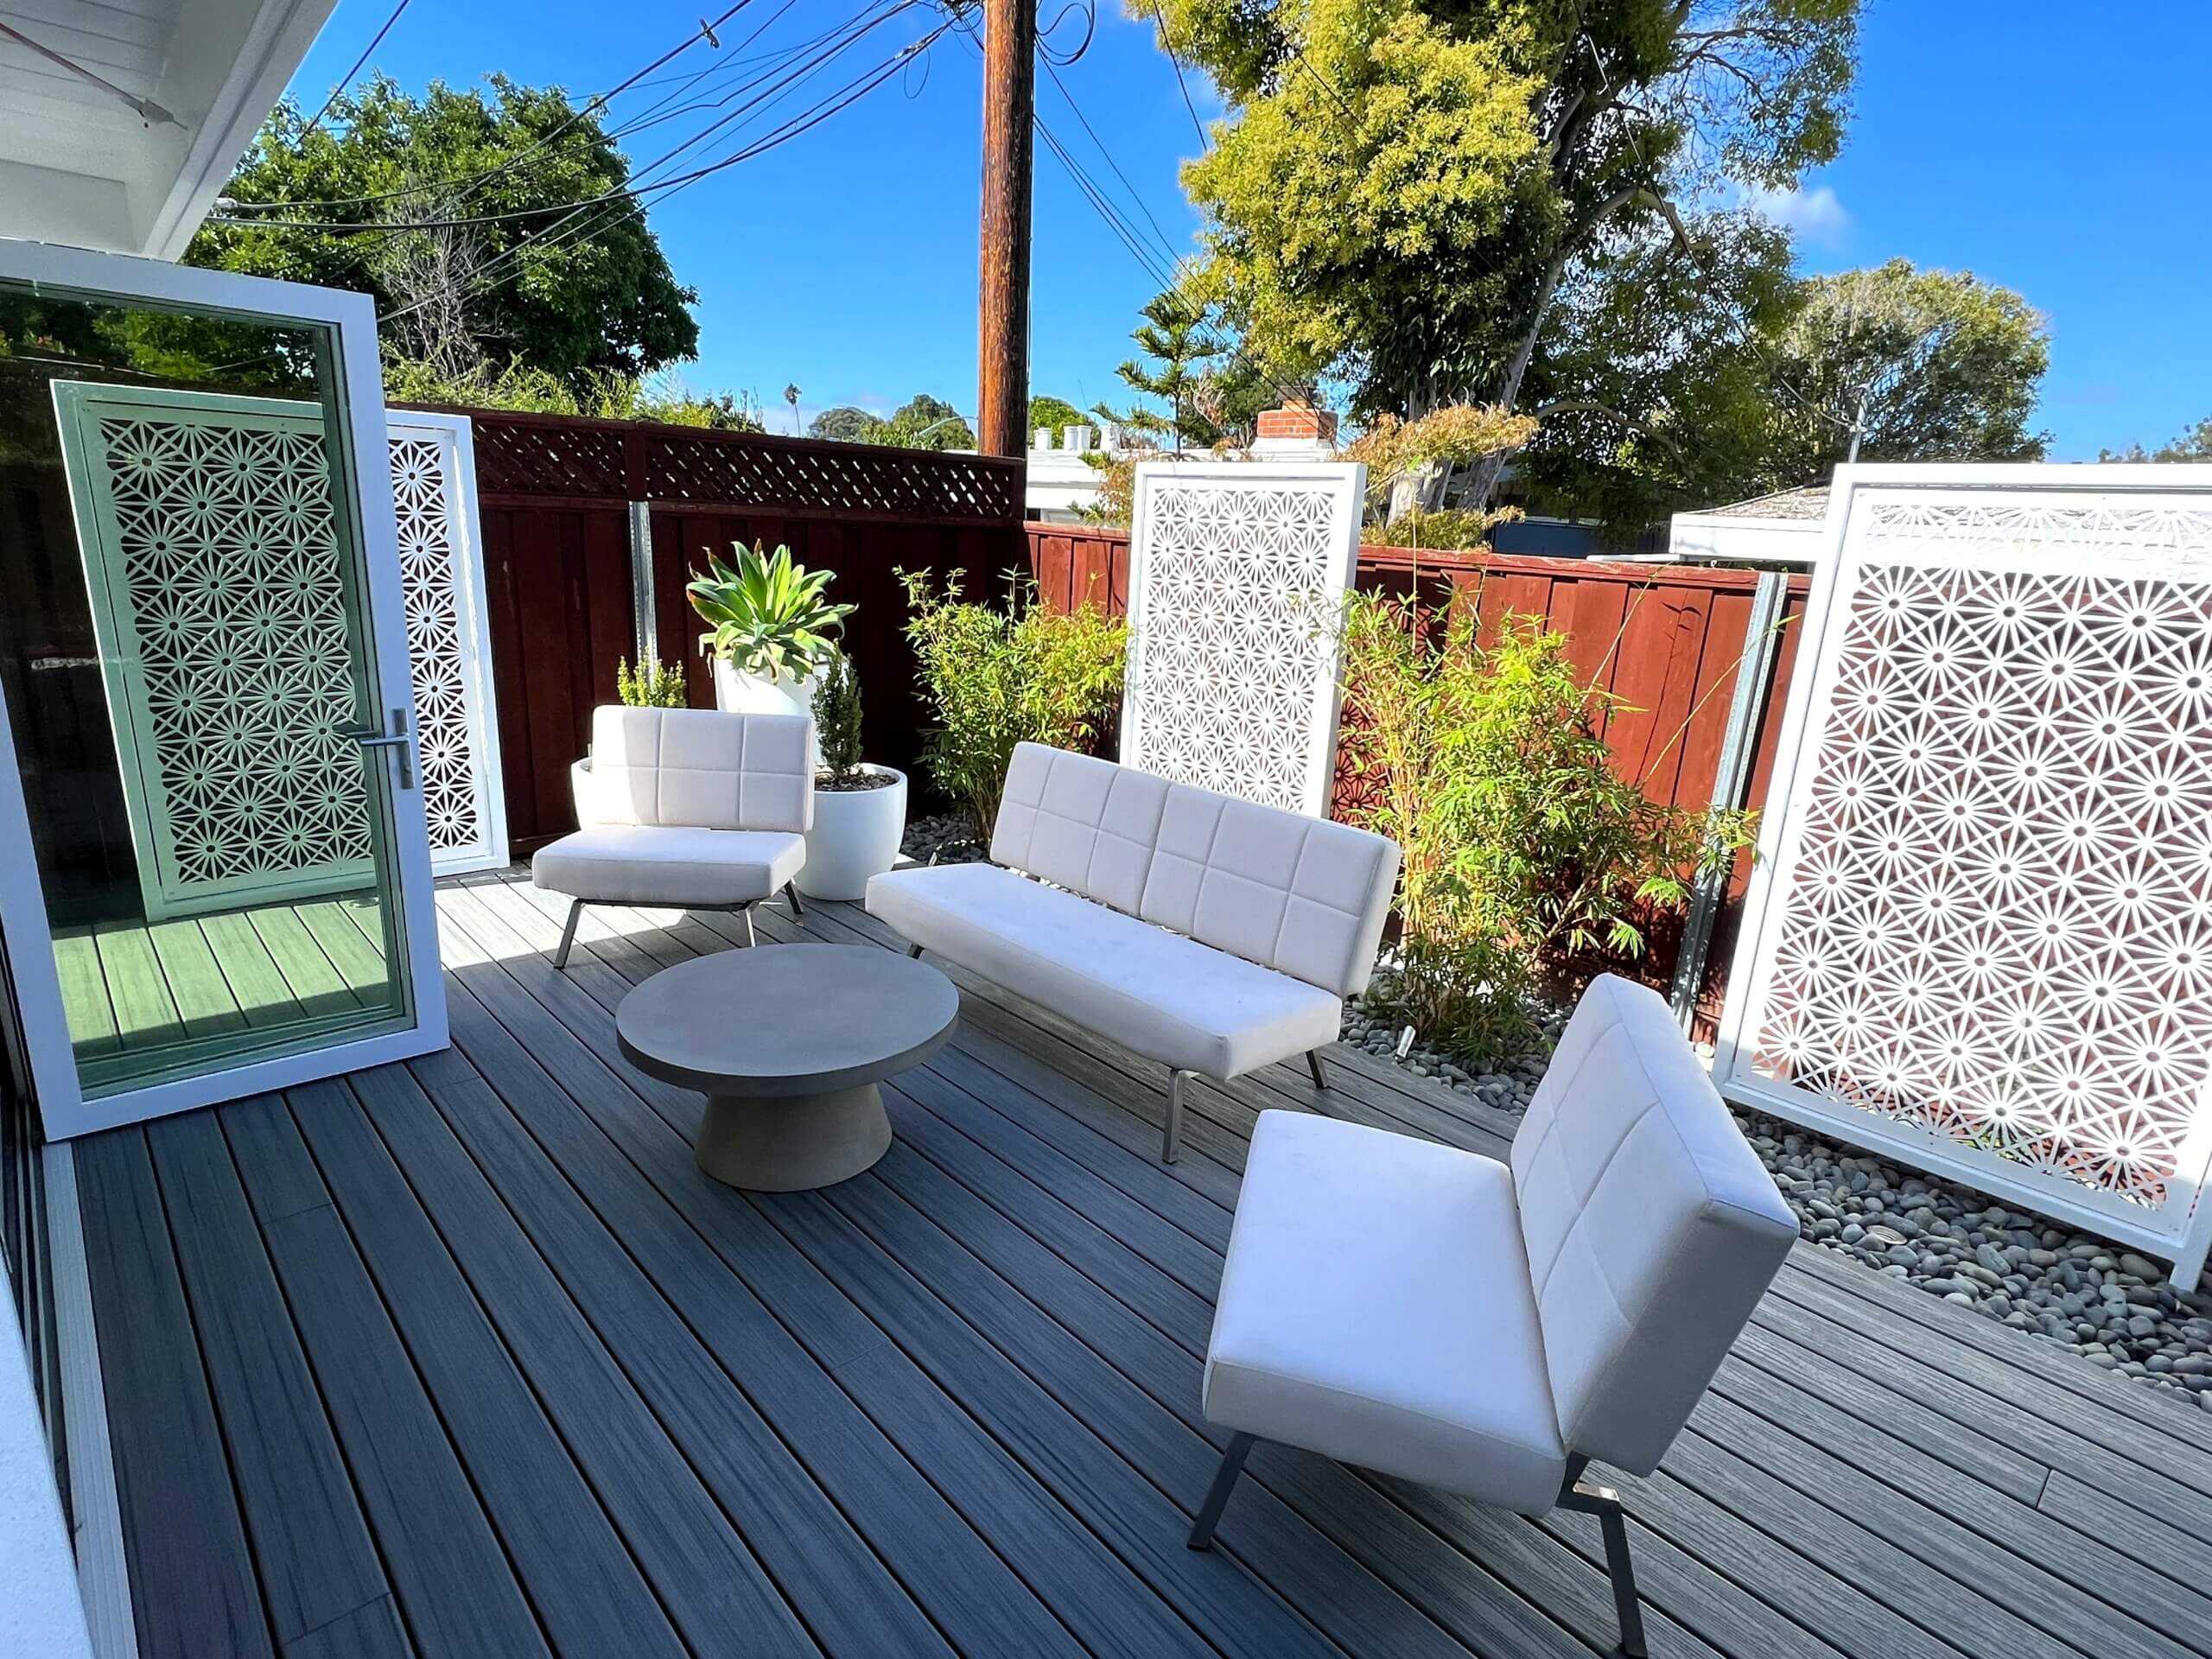 Backyard Sun Deck with Seating Area for Landscape Remodel for Eichler